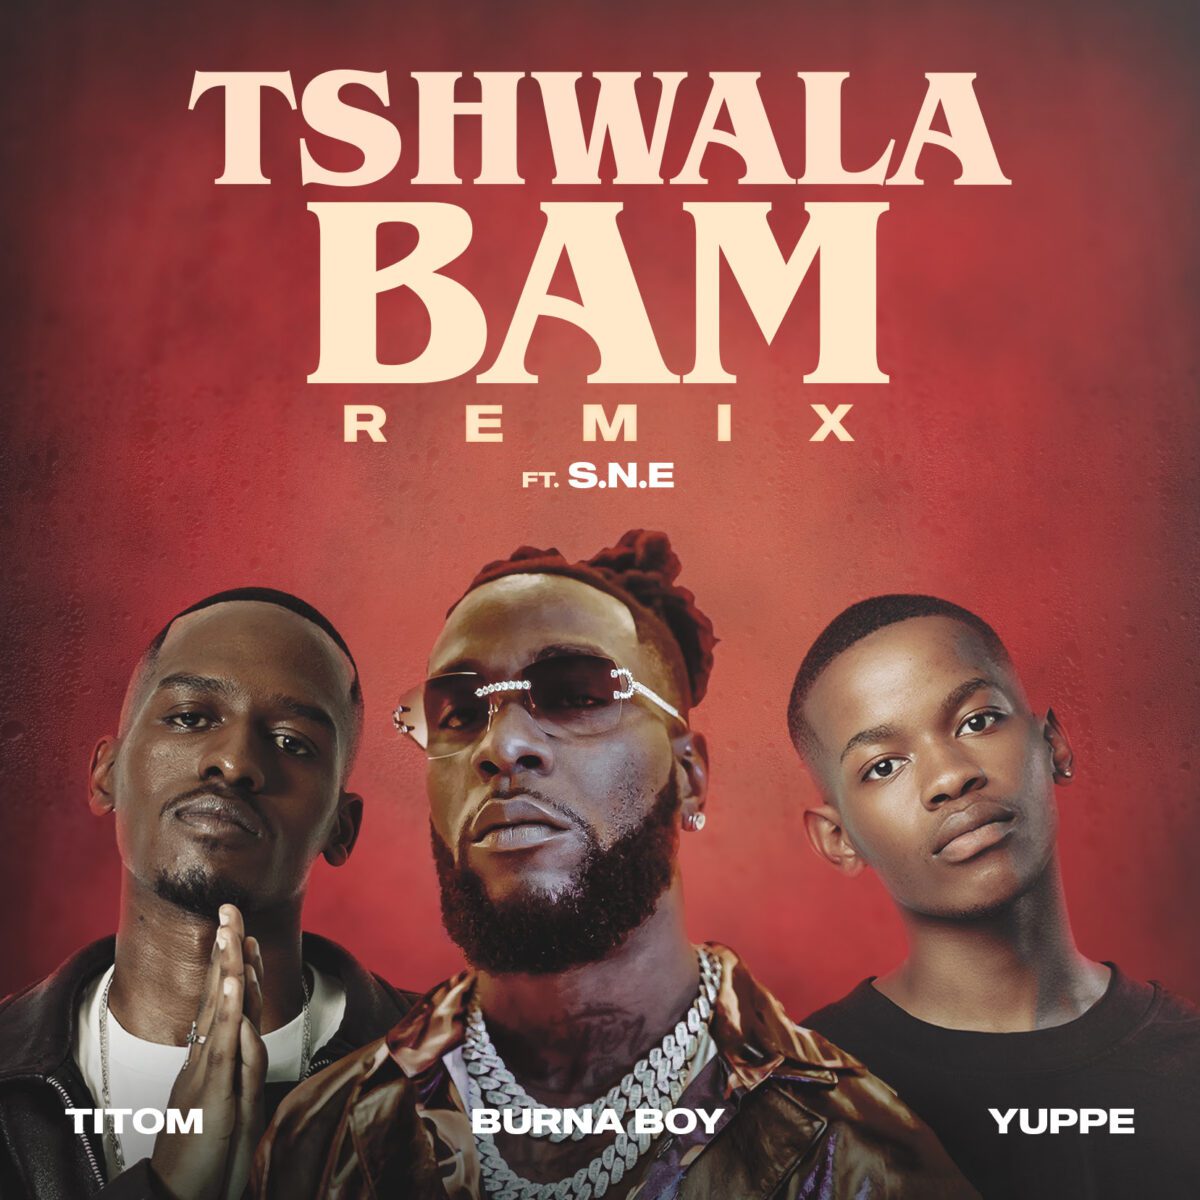 Burna Boy Joins Forces for Electrifying "Tshwala Bam" Remix Video Release 6